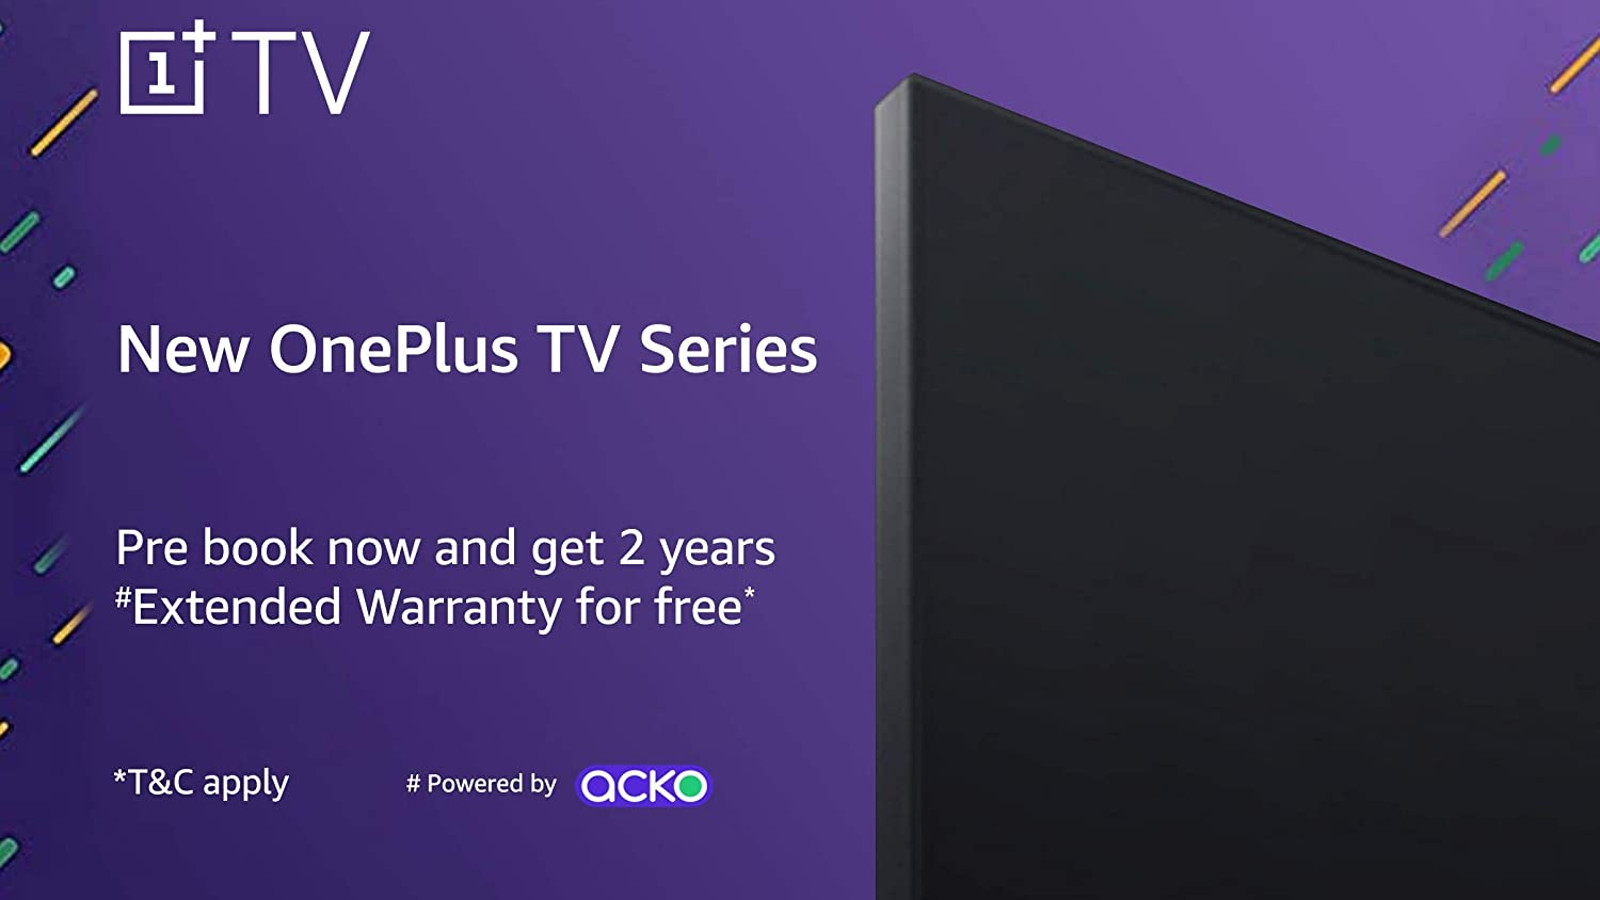 The 2020 OnePlus TV series is coming.